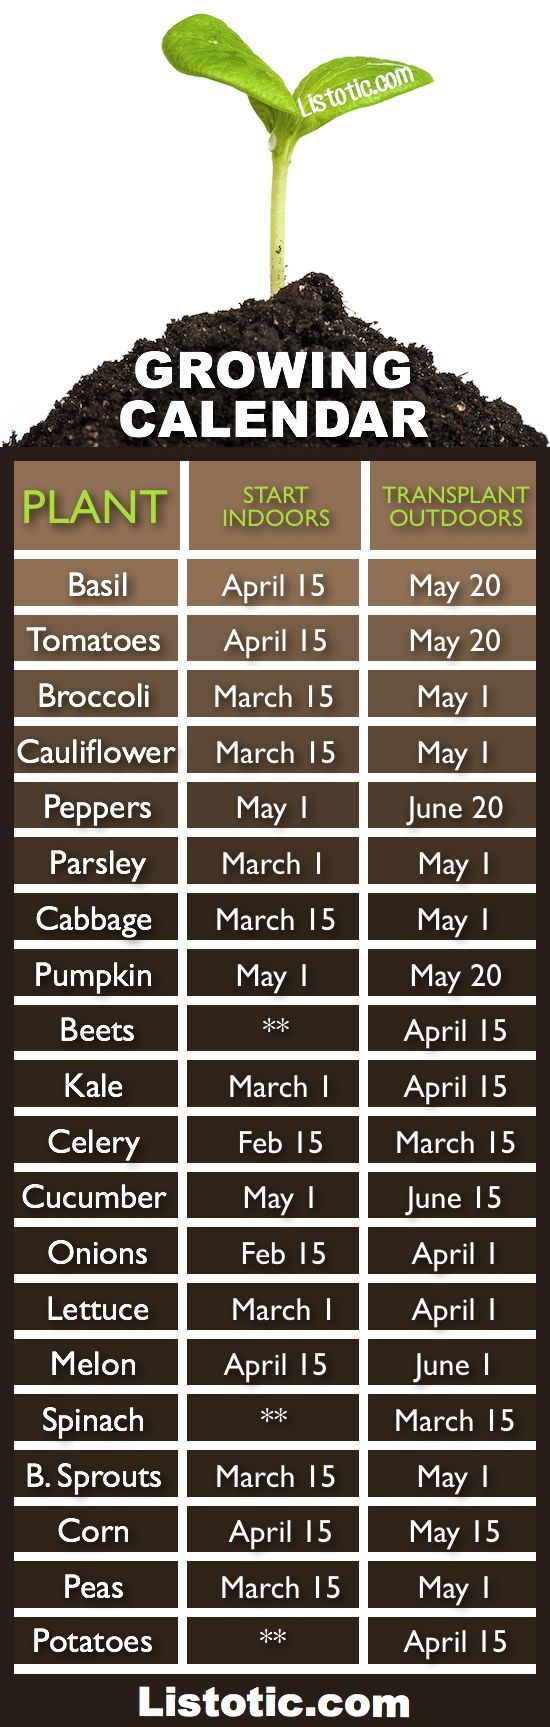 When to plant your vegetable garden.... When to plant what? Time to get started!